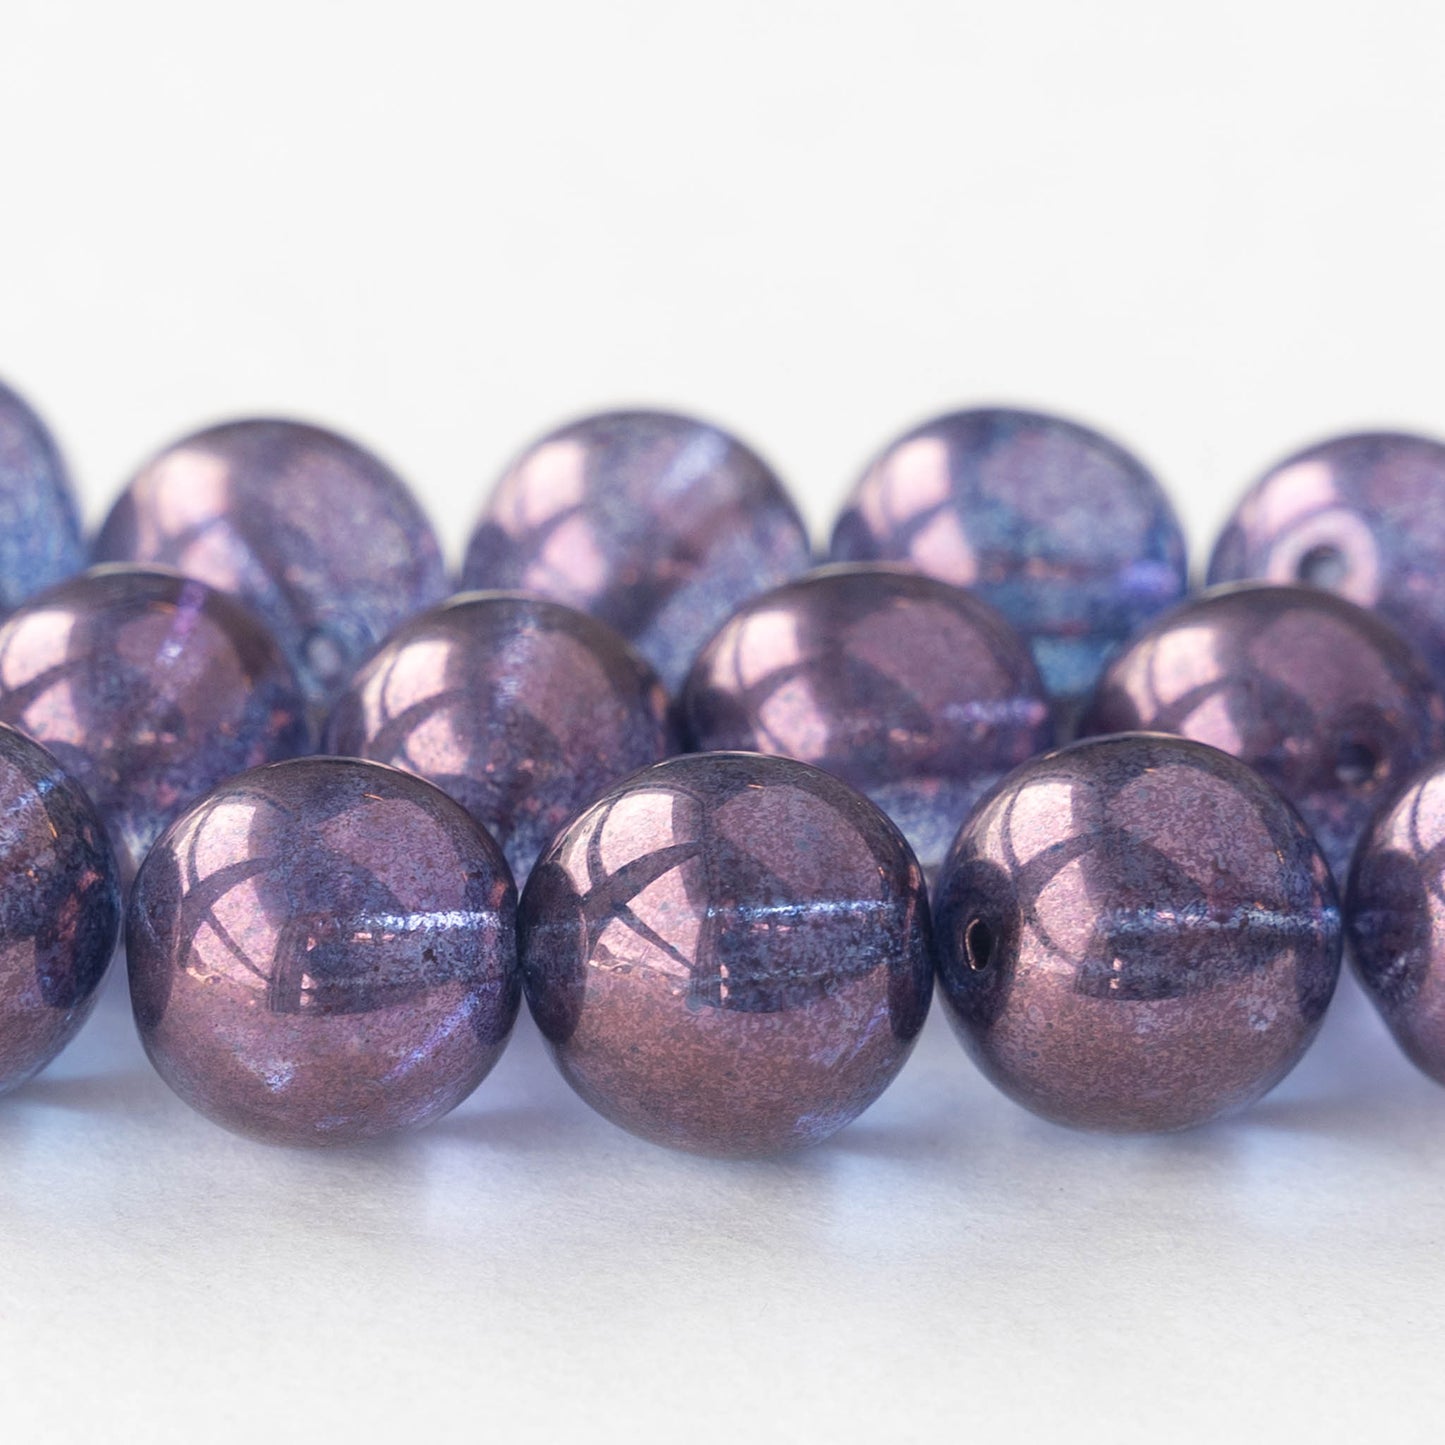 12mm Round Glass Beads - Blue and Purple Bronze Luster - 10 Beads